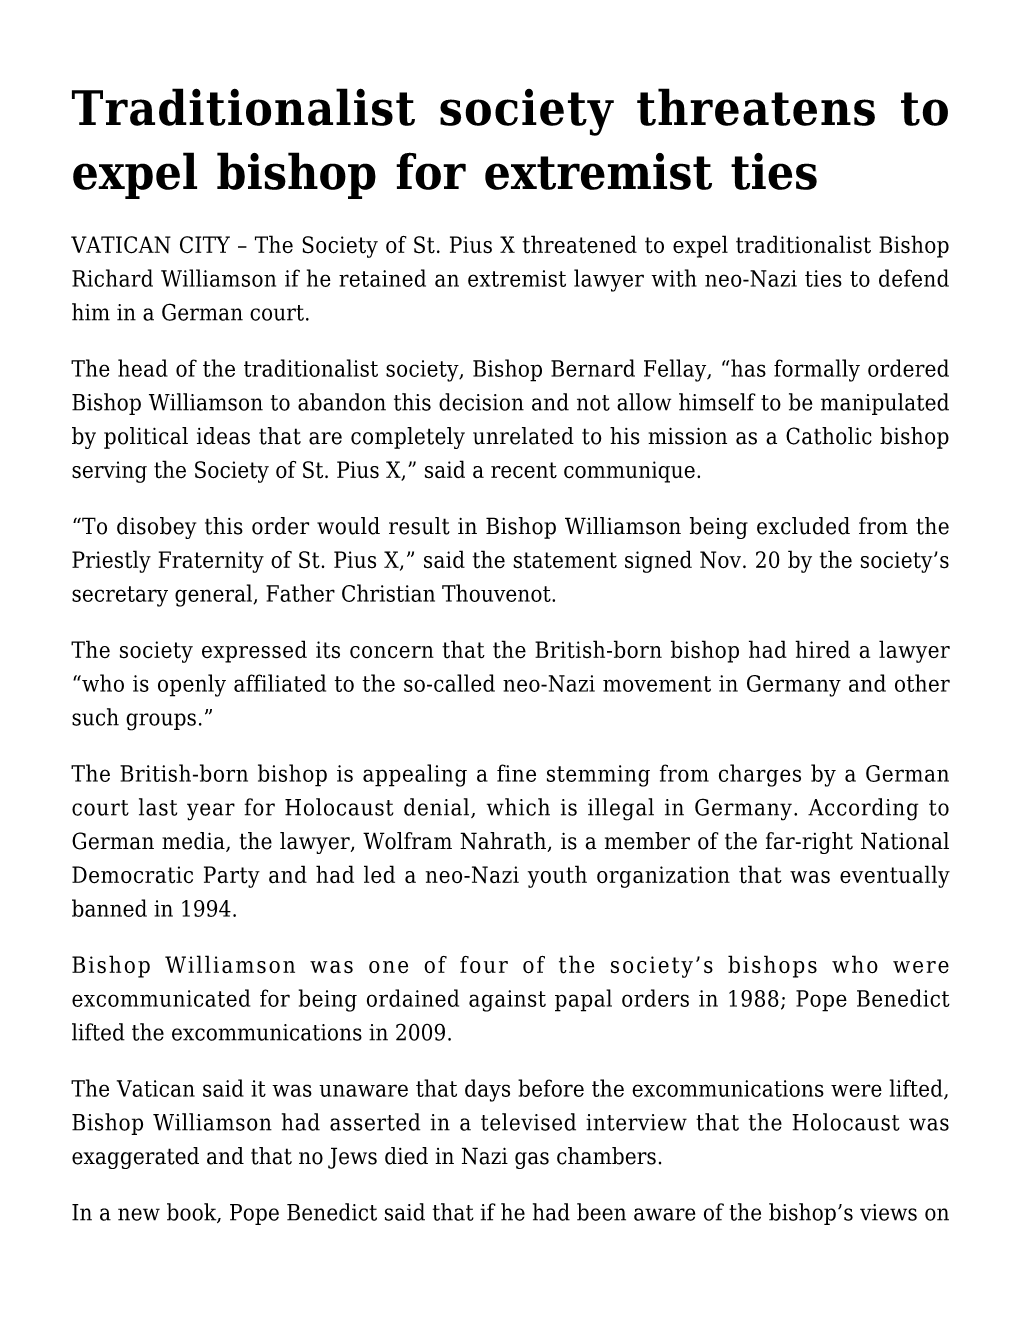 Traditionalist Society Threatens to Expel Bishop for Extremist Ties